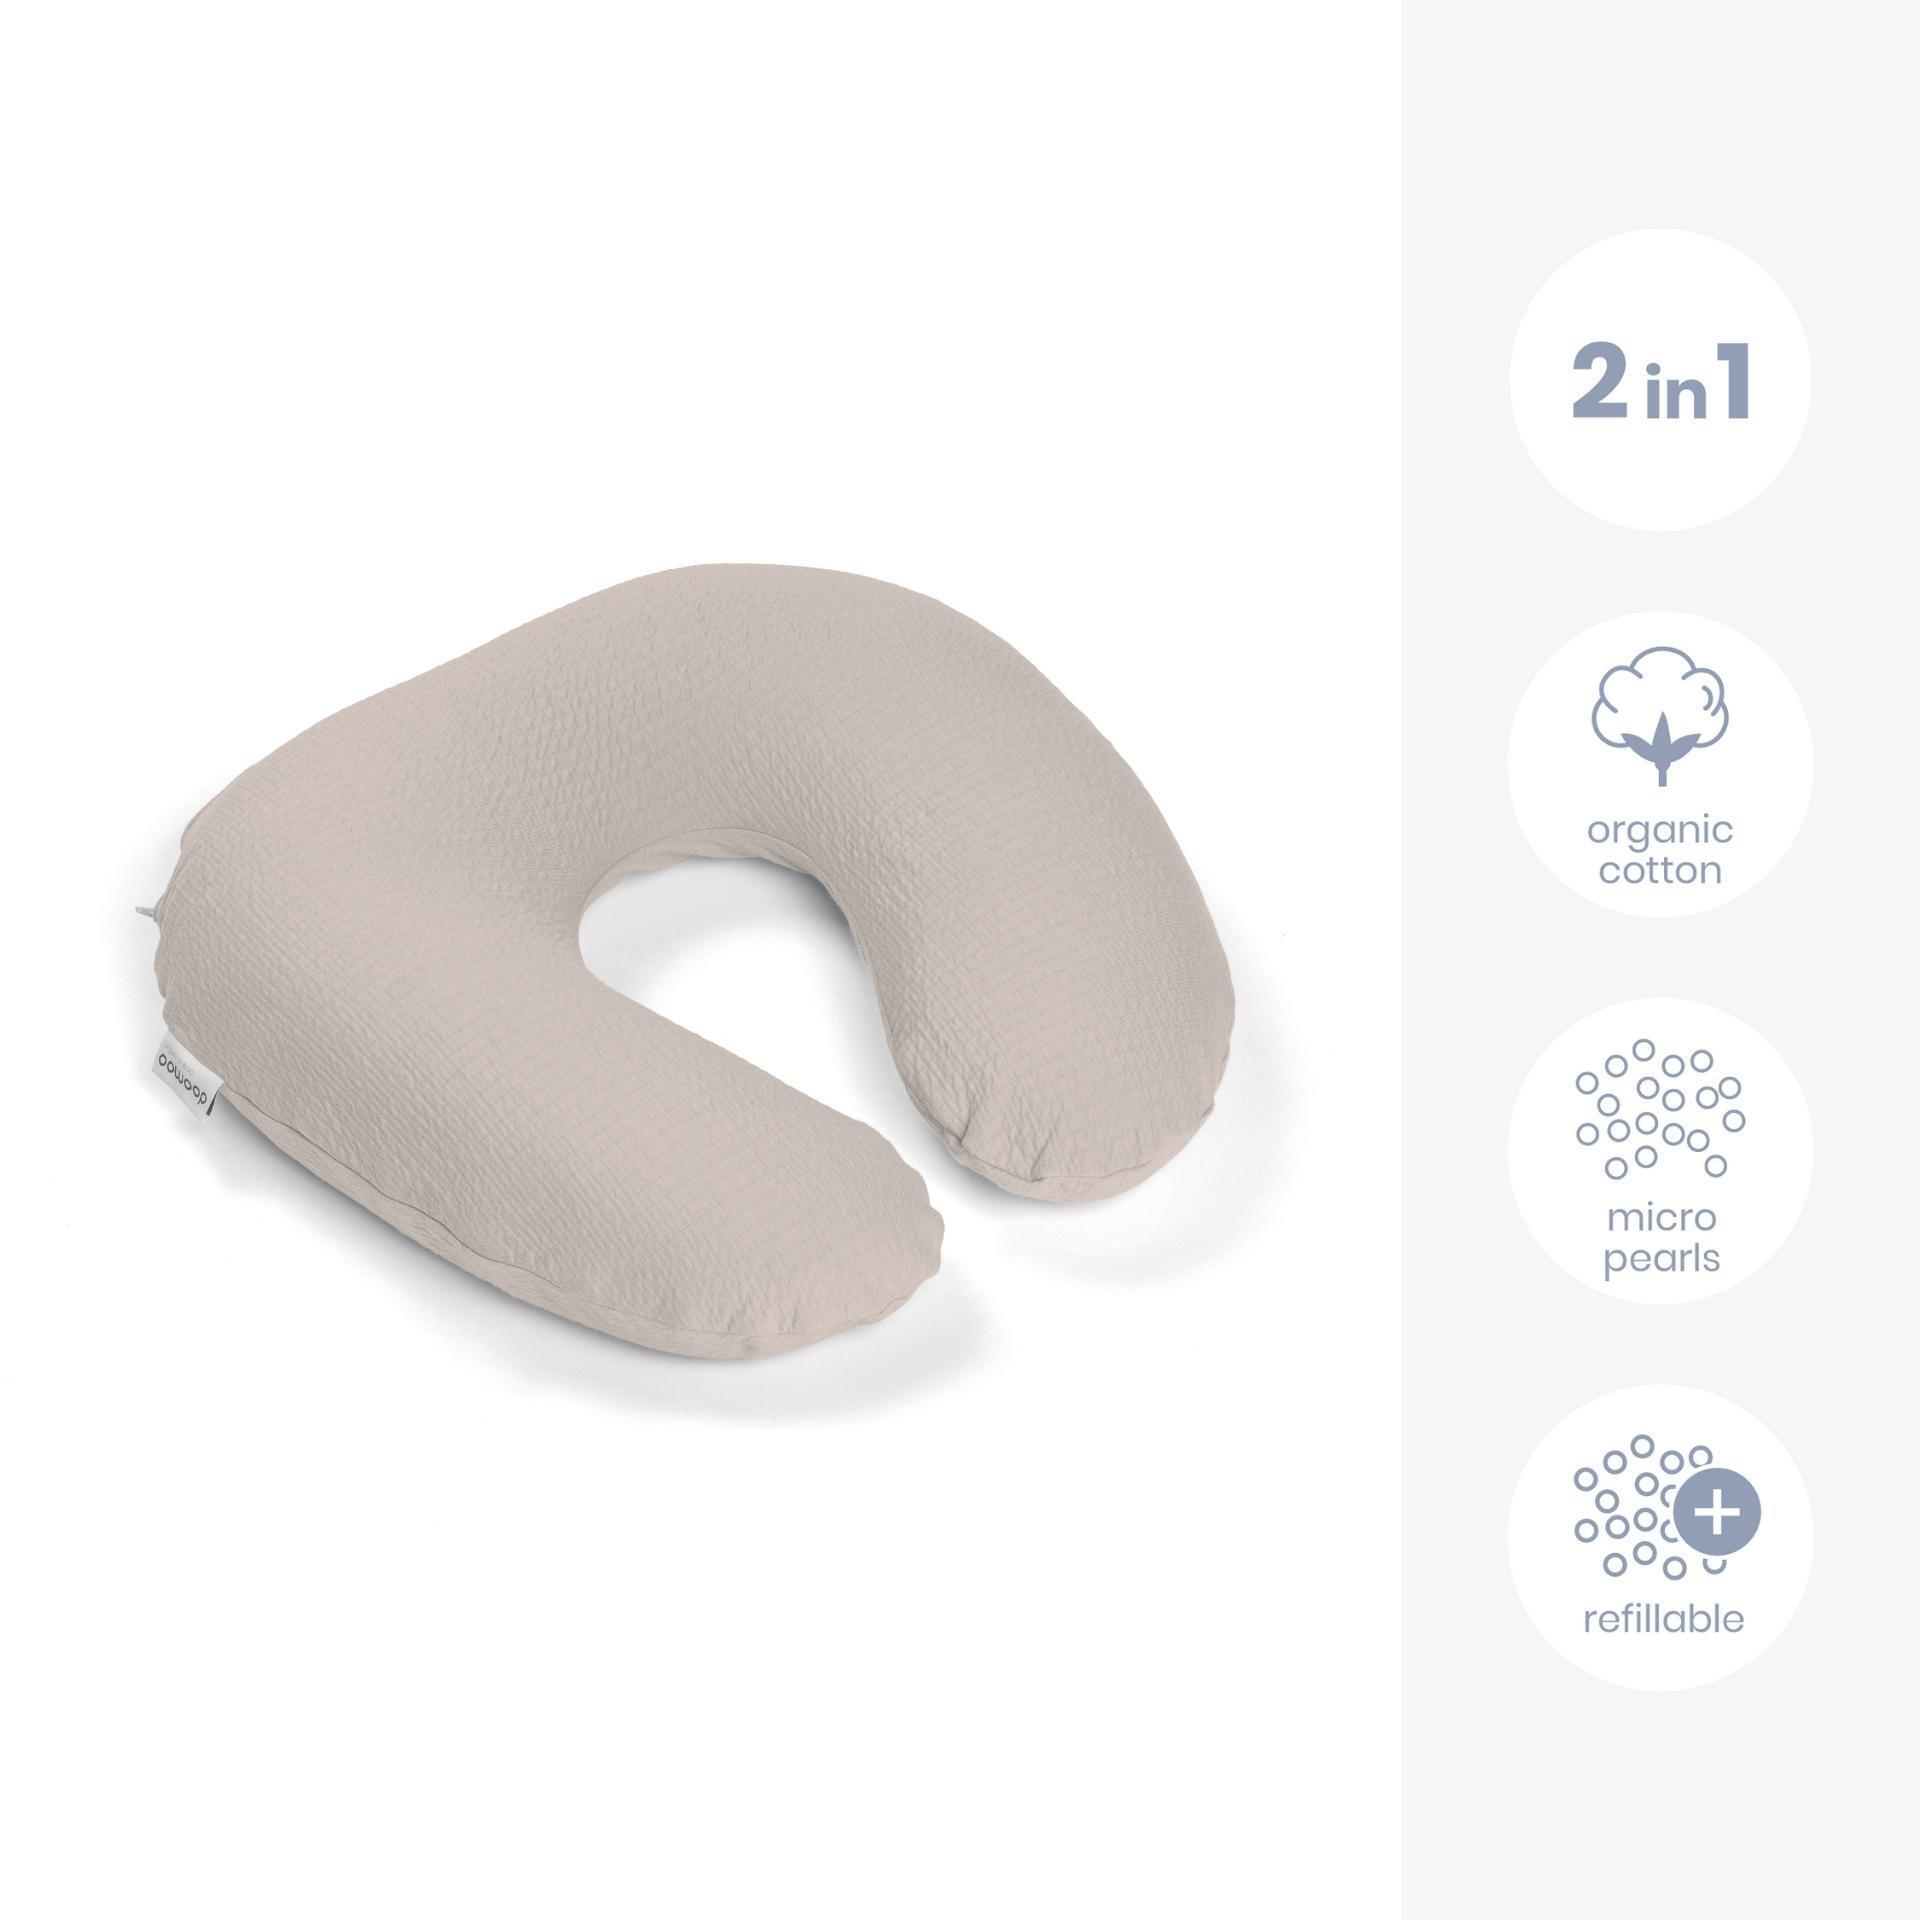 Littlesouq مستلزمات الام و الطفل ،محل اطفال،babyshop‎ on Instagram:  Imagine one pillow fulfilling all your dreams! doomoo Buddy is a  multi-functional pillow, with an outstanding softness and flexibility,  supporting you during your